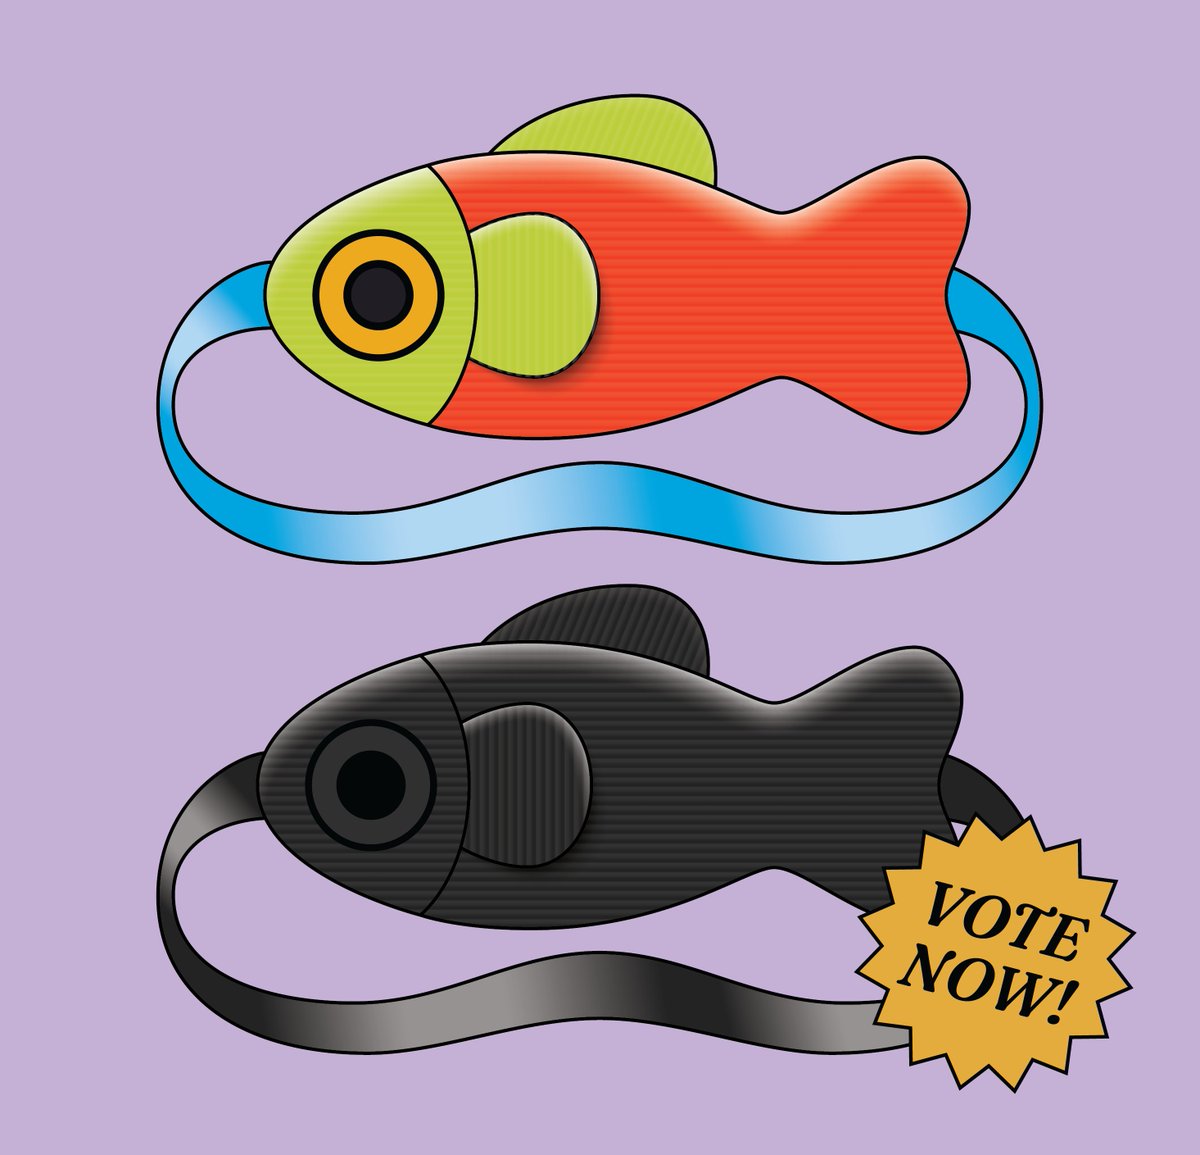 Help us pick our last Fish Bag color-way stretch goal! Voting ends Monday, gather your friends and allies and vote for your favorite!